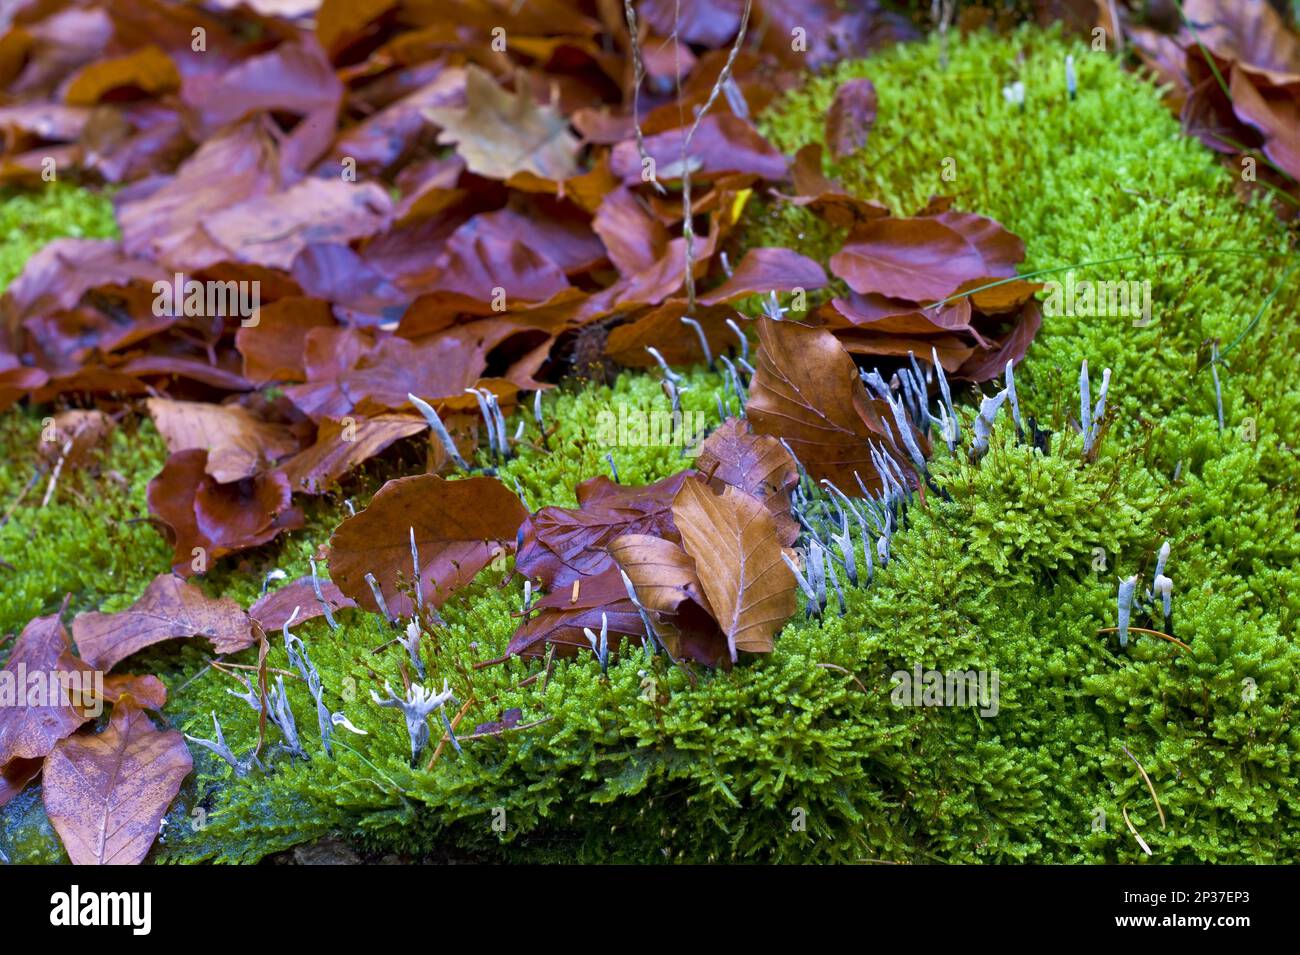 Beech stump with moss and tree fungi, Brundorf in the district of Osterholz, Germany Stock Photo